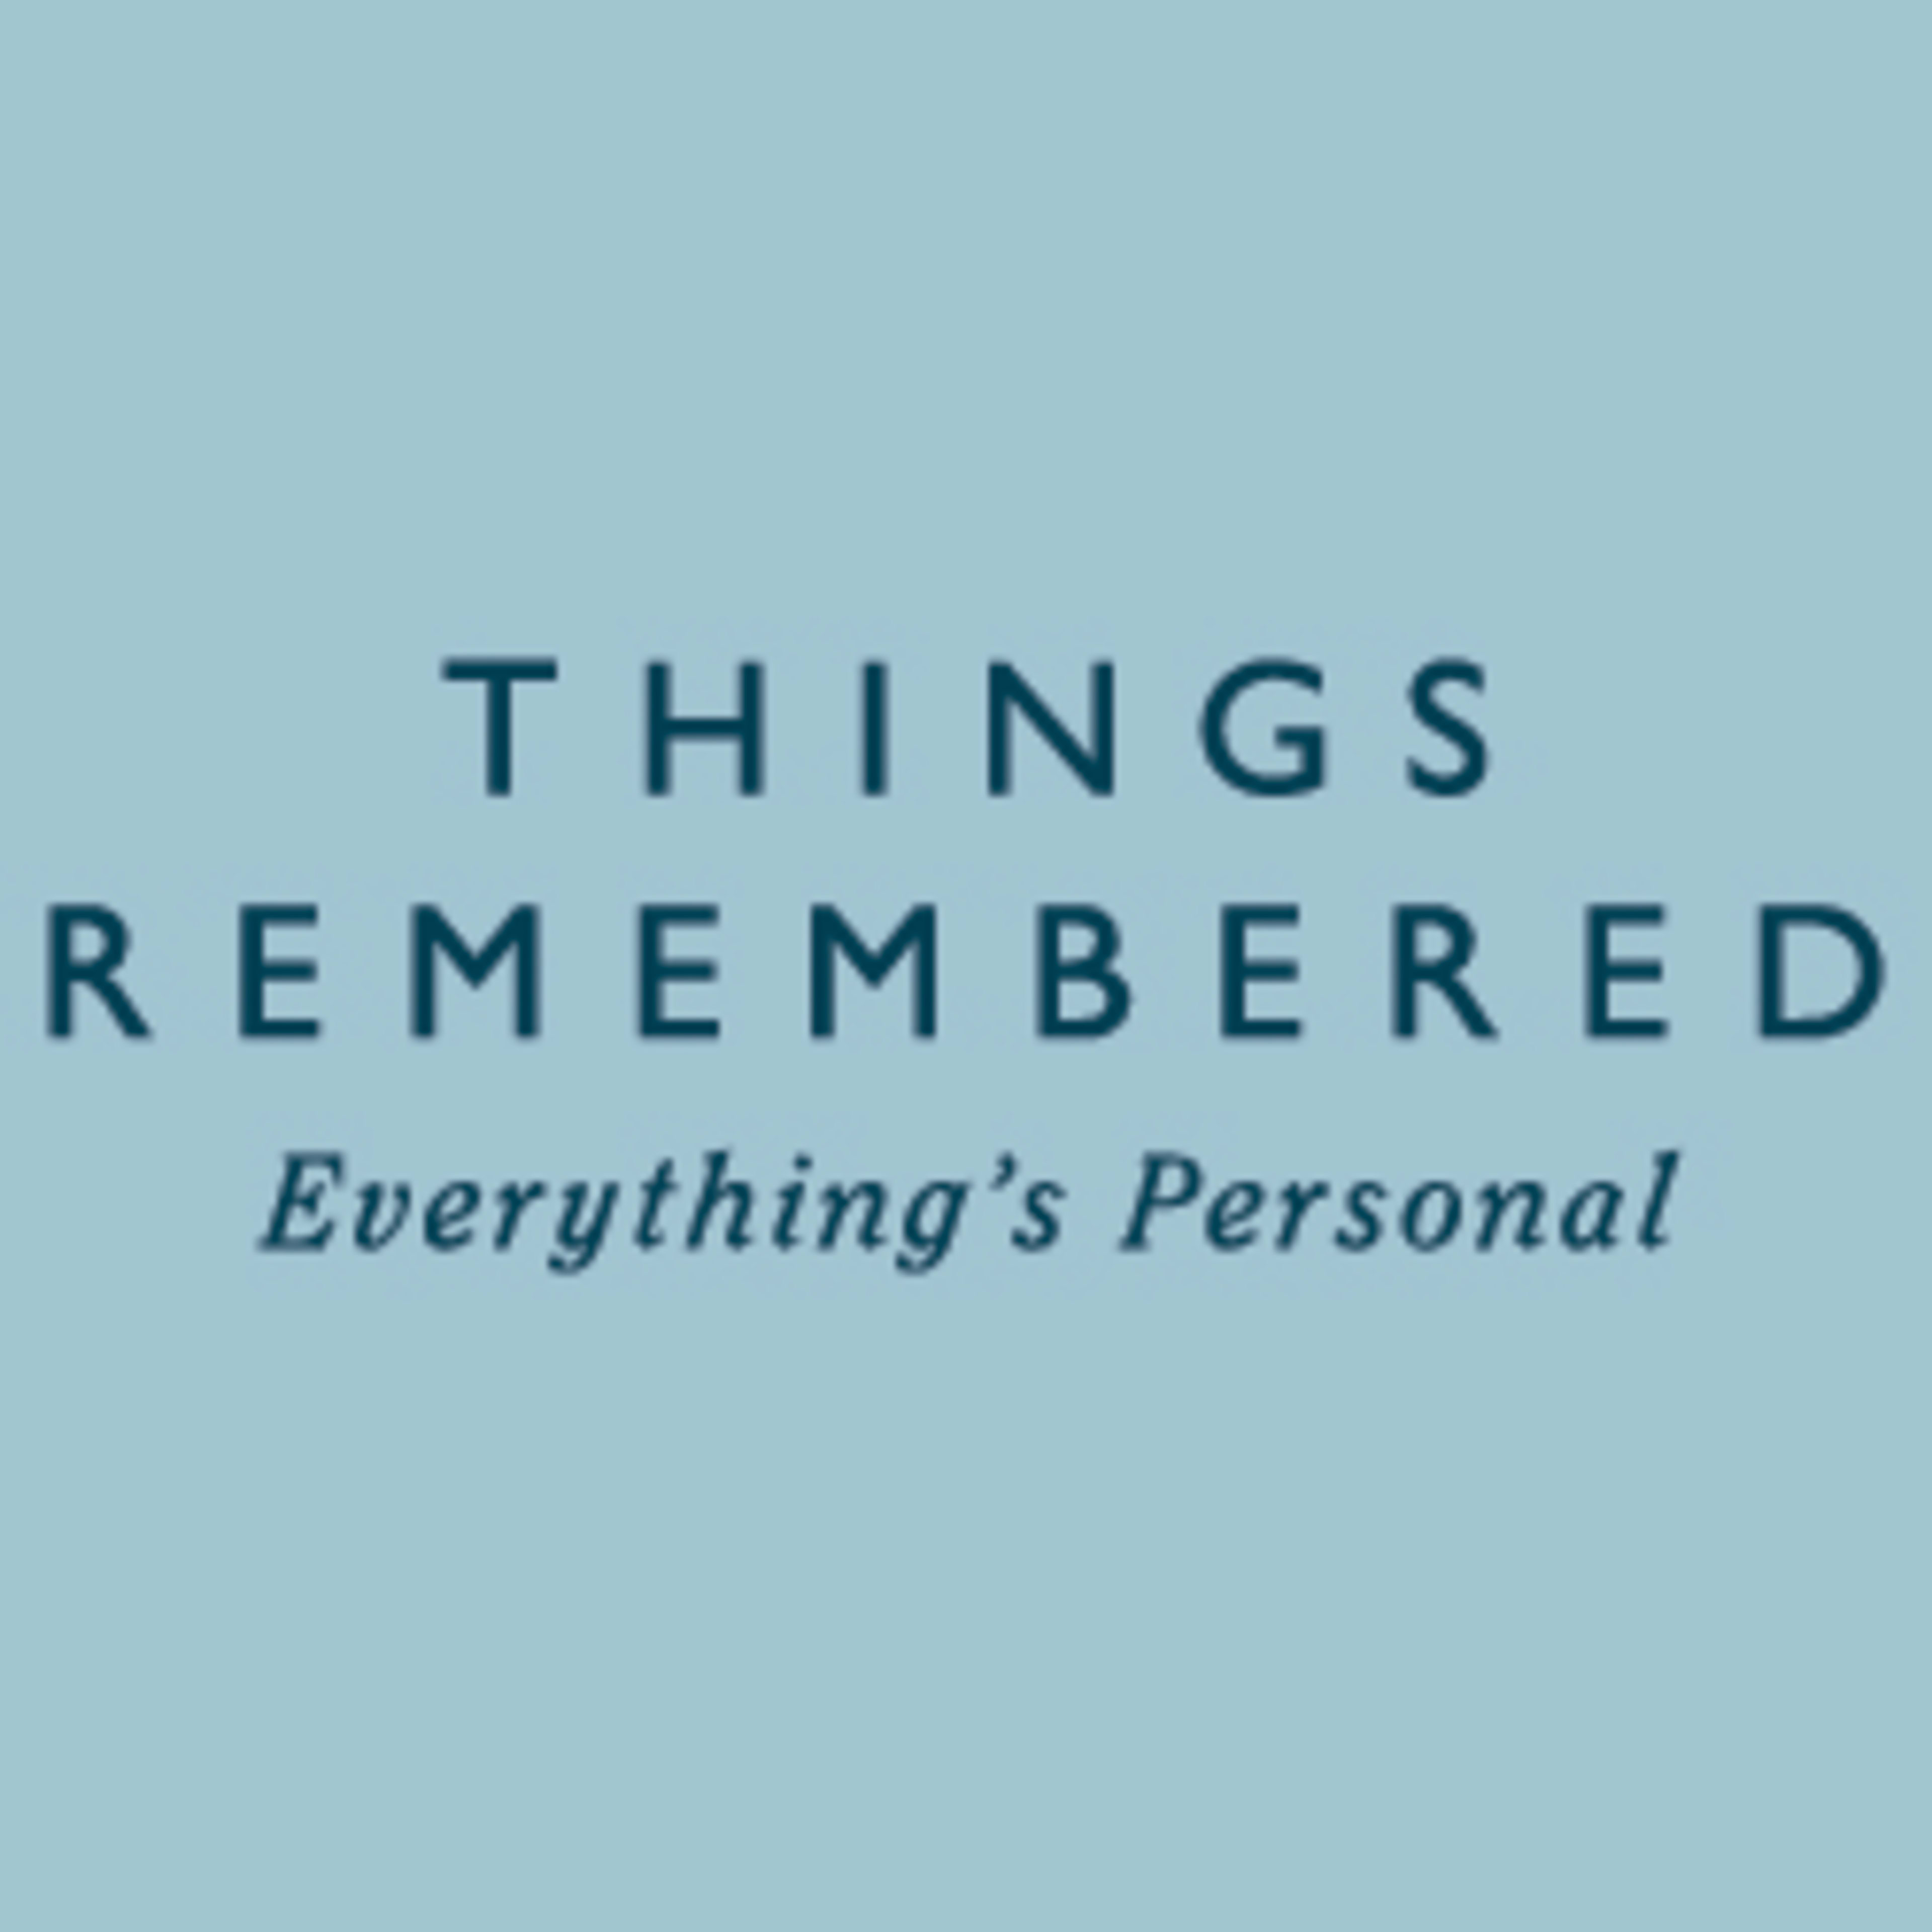 Things RememberedCode